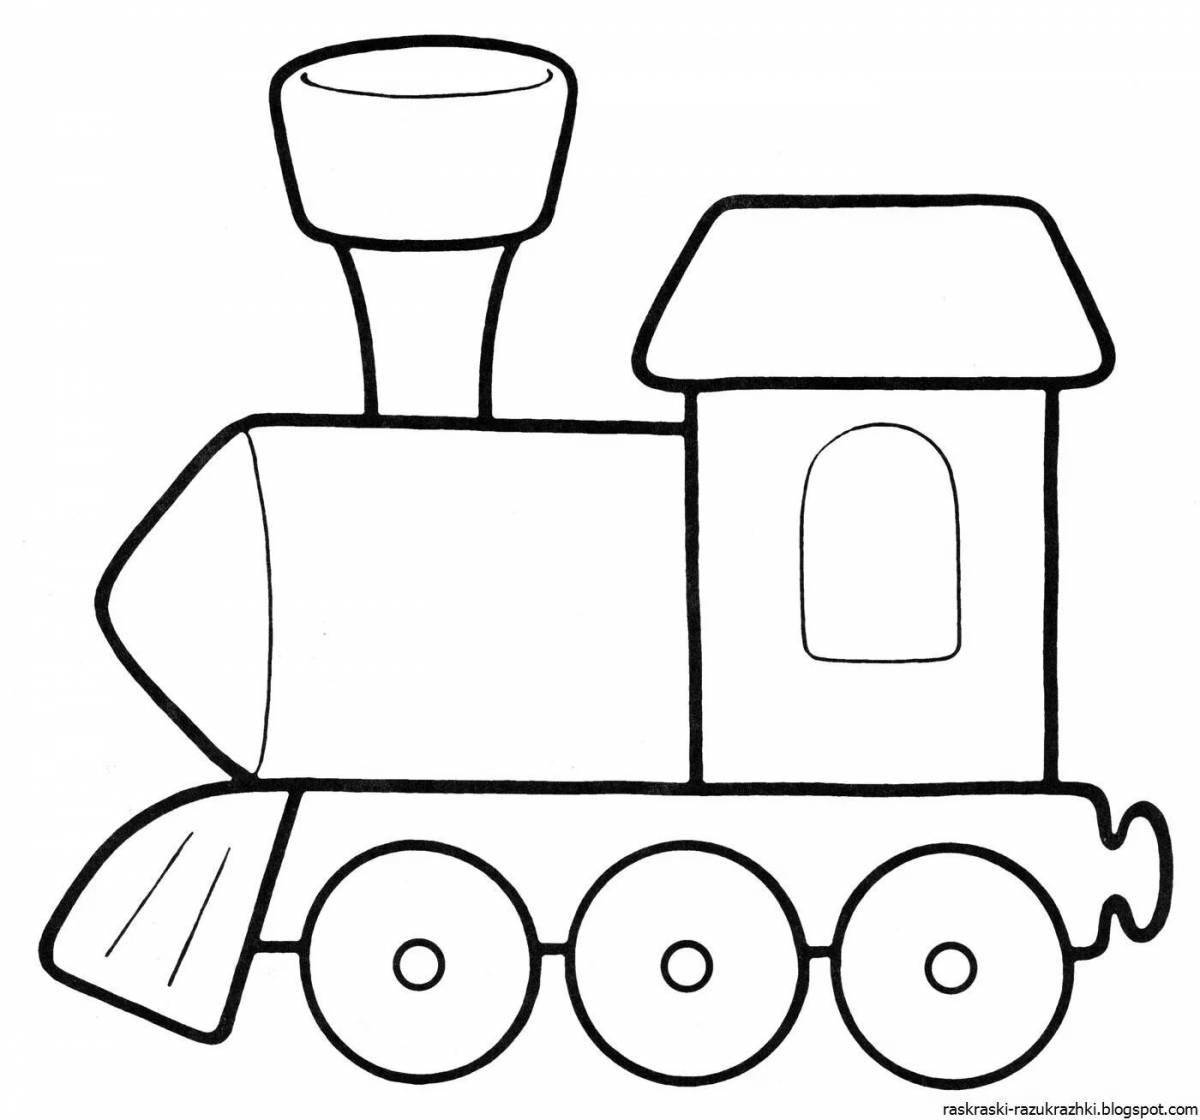 Outstanding train coloring page for 2-3 year olds